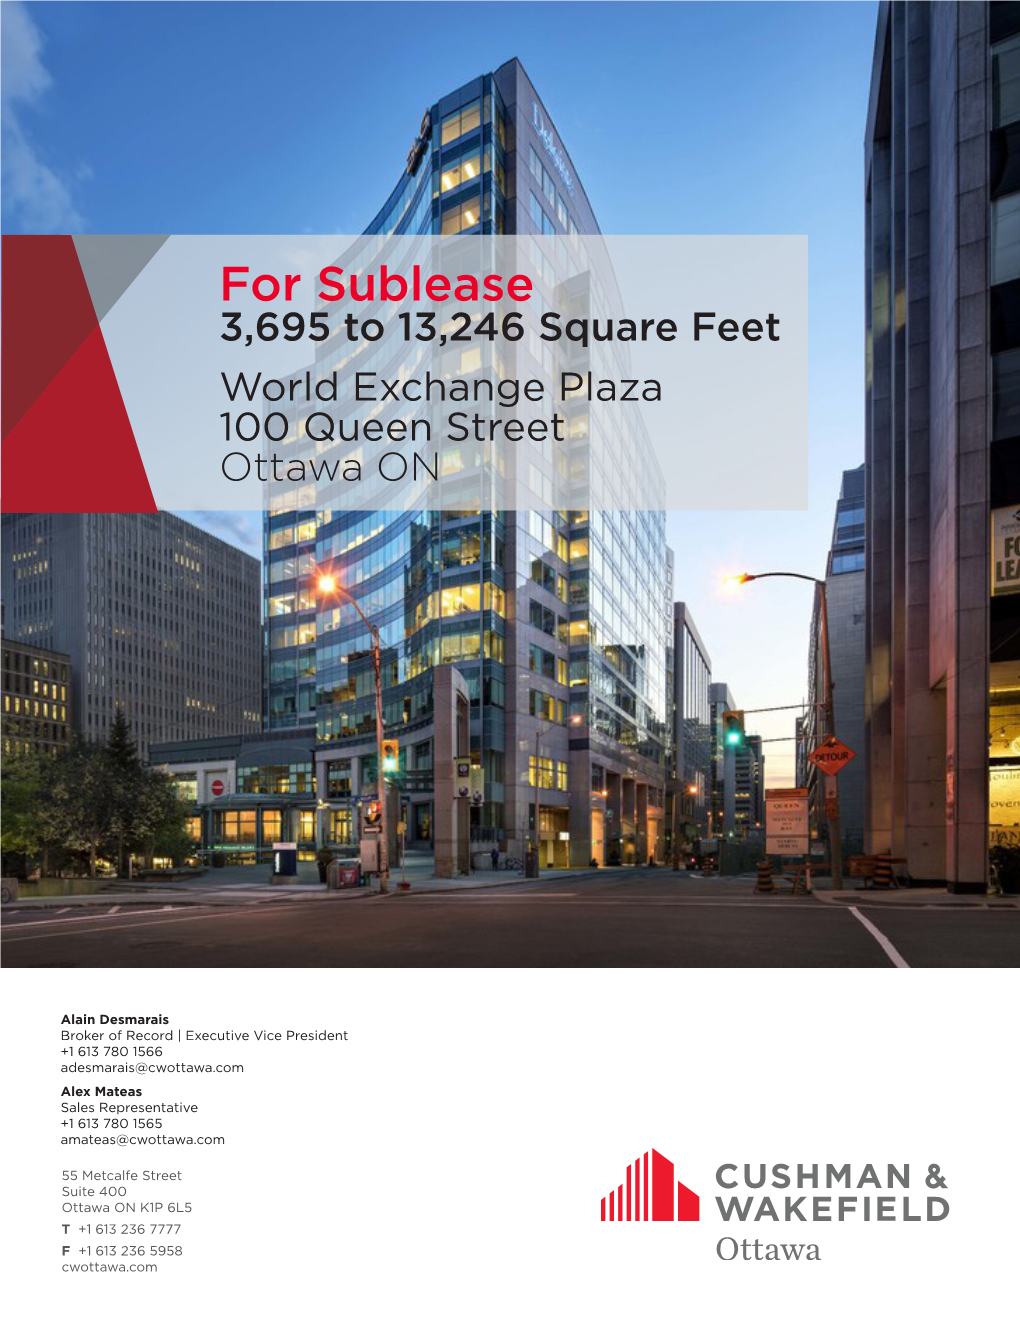 For Sublease 3,695 to 13,246 Square Feet World Exchange Plaza 100 Queen Street Ottawa ON